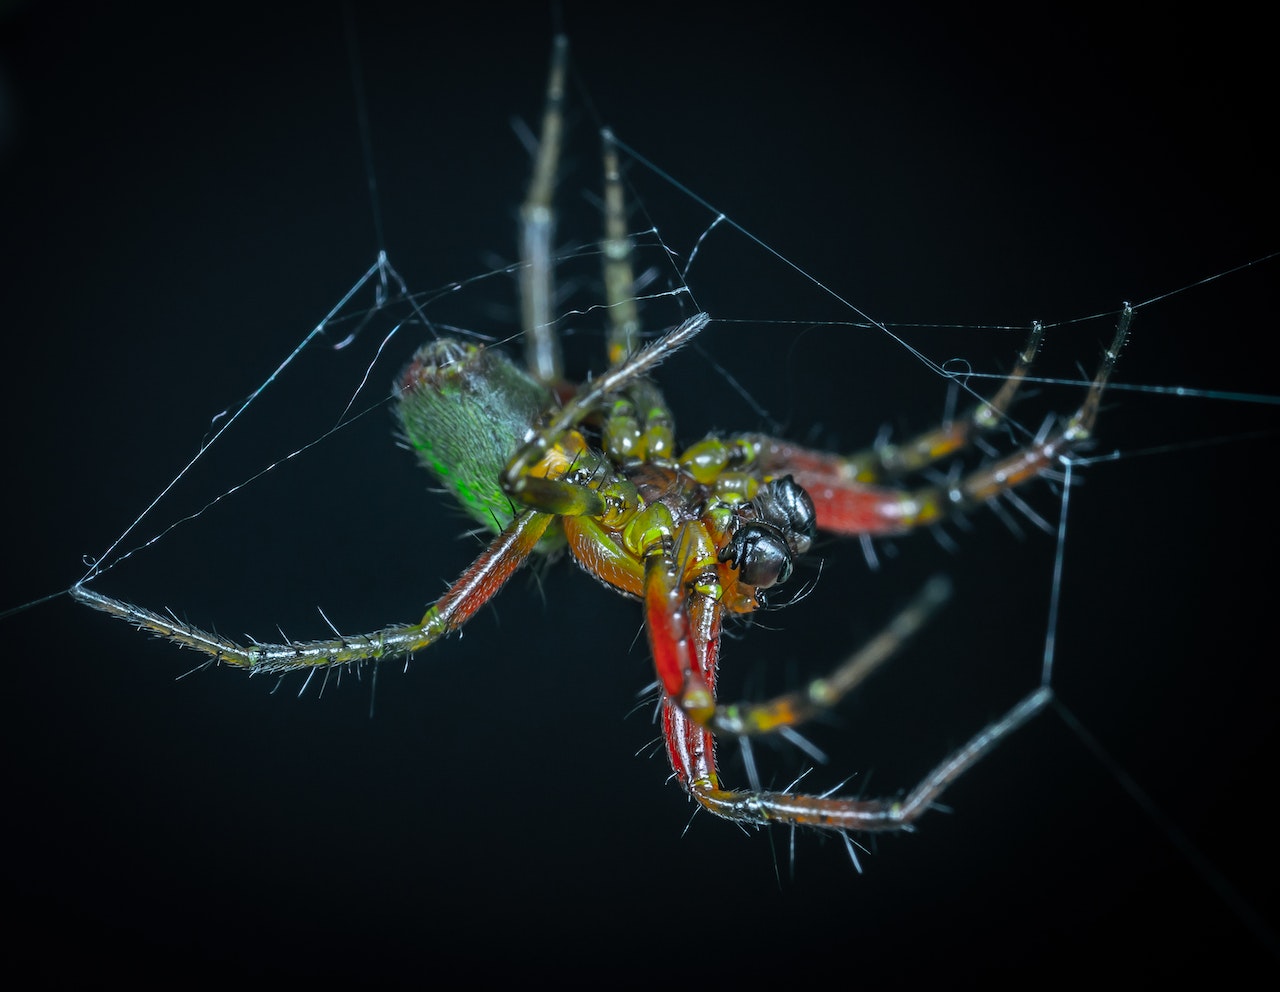 Webbing Green and Red Spider